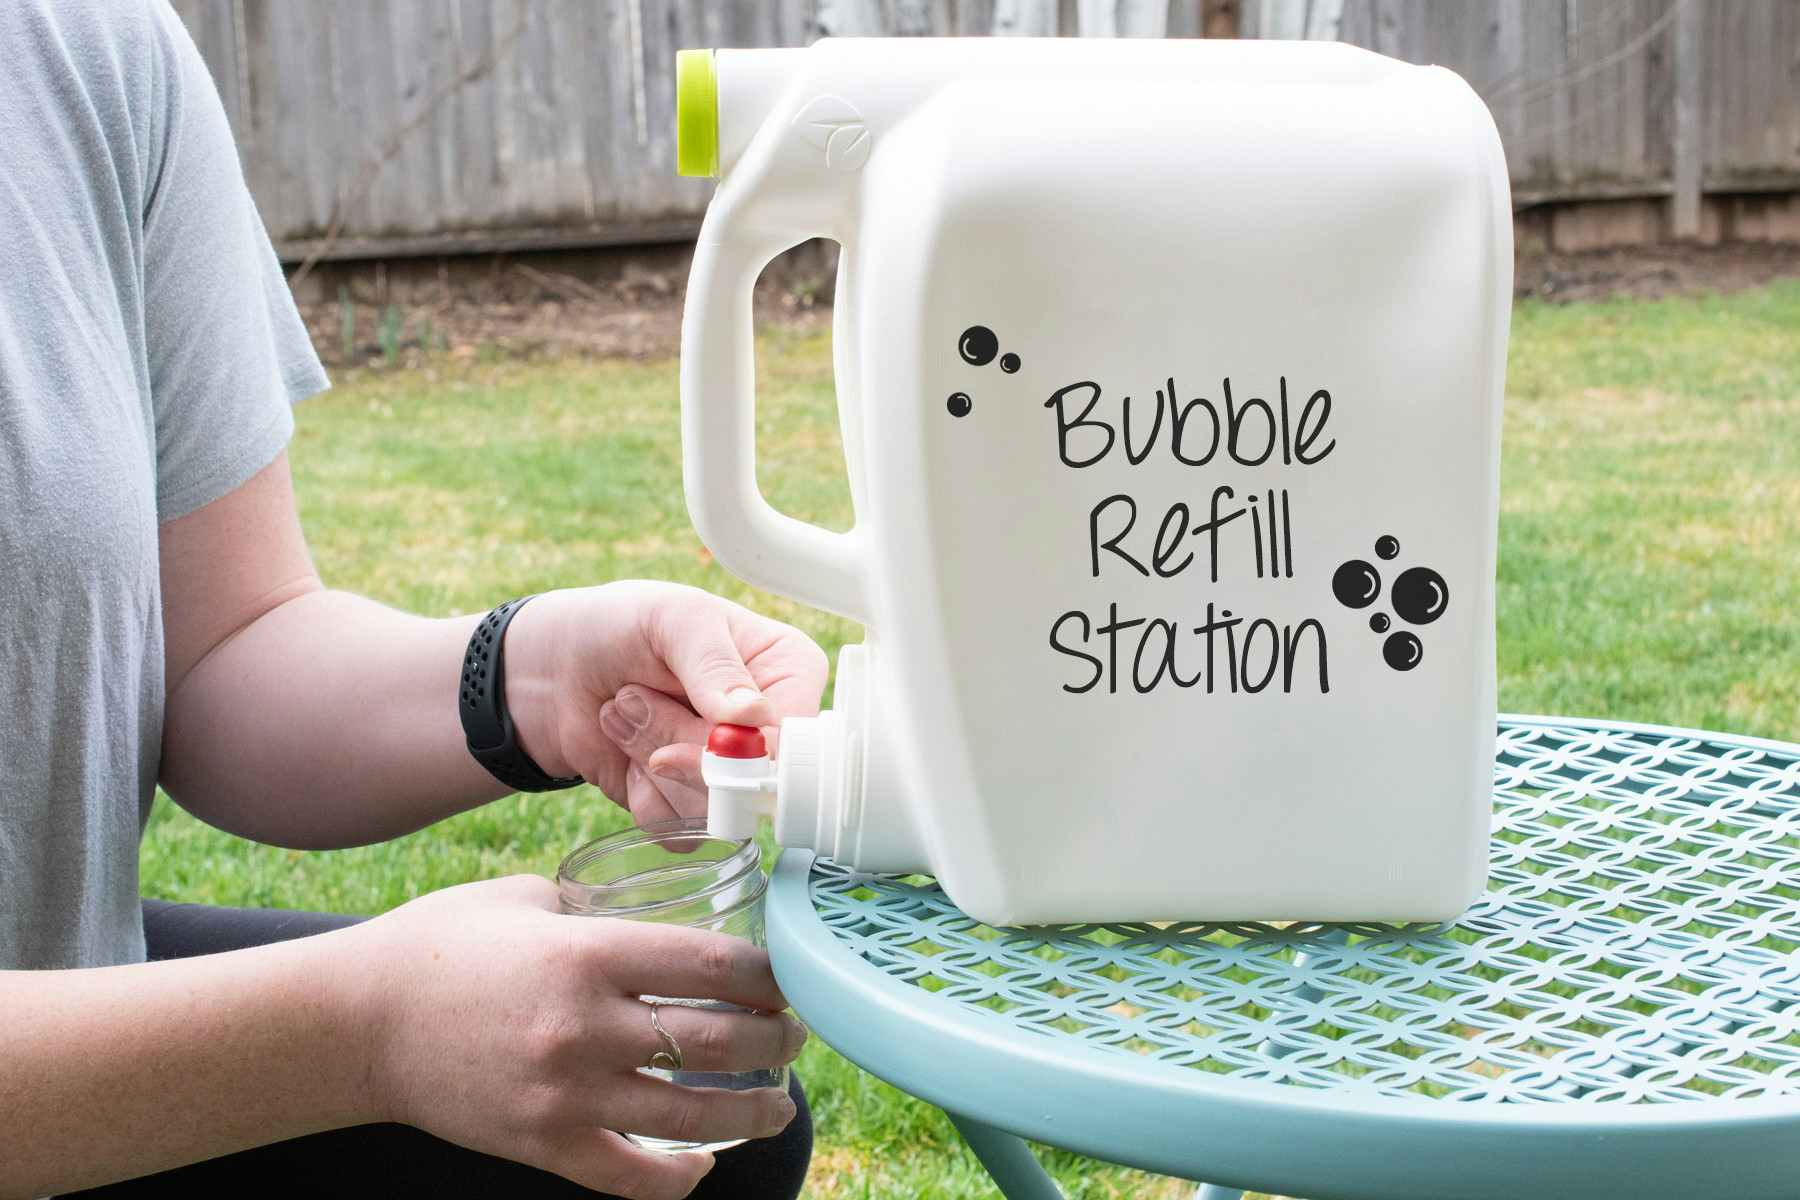 Reuse a laundry detergent bottle for a bubble refill station